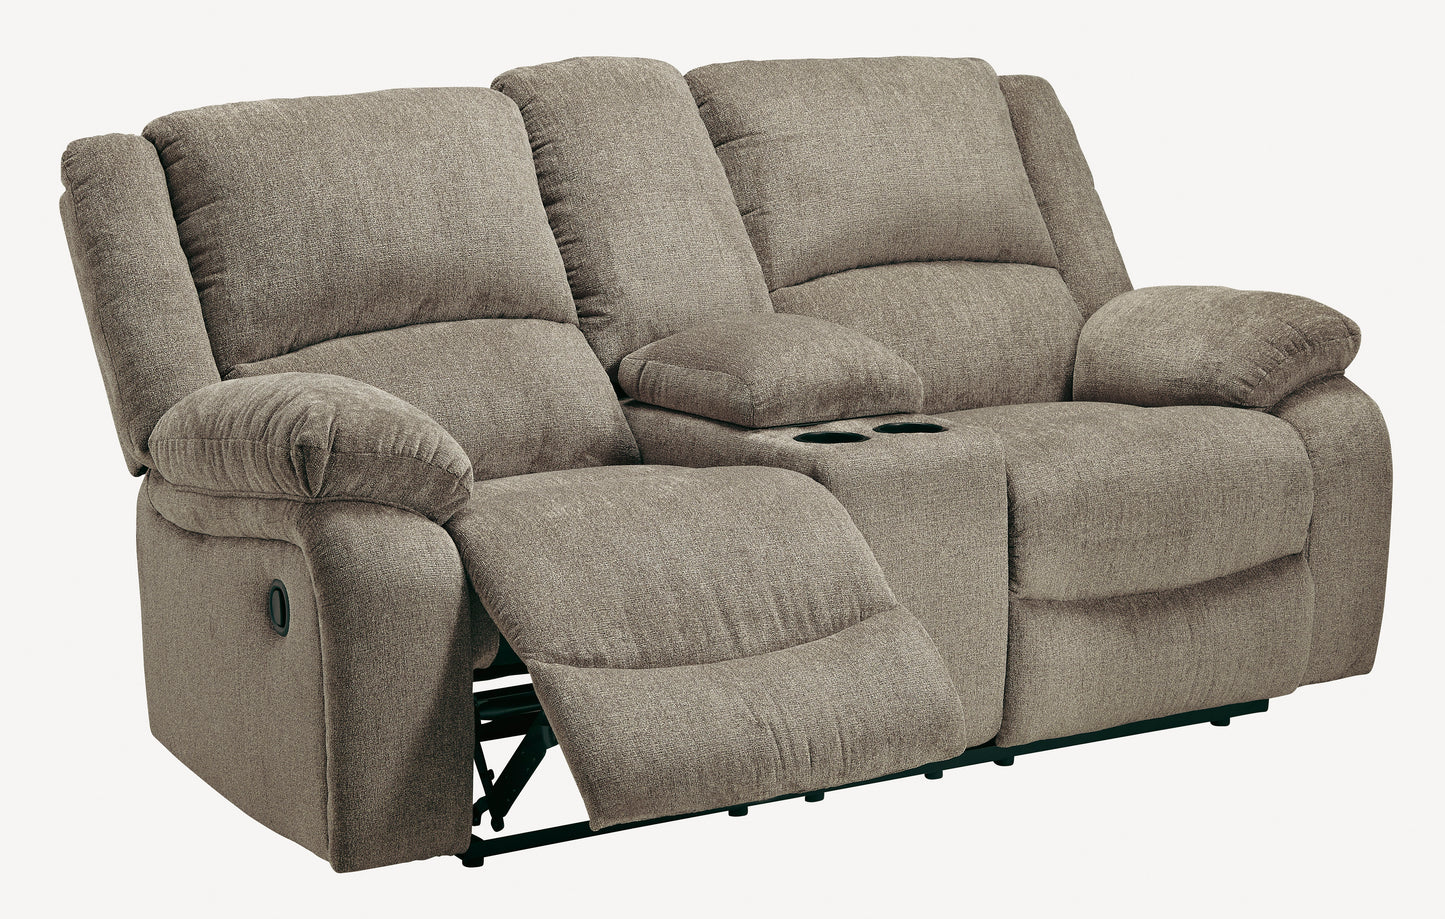 Draycoll Sofa and Loveseat - PKG007319